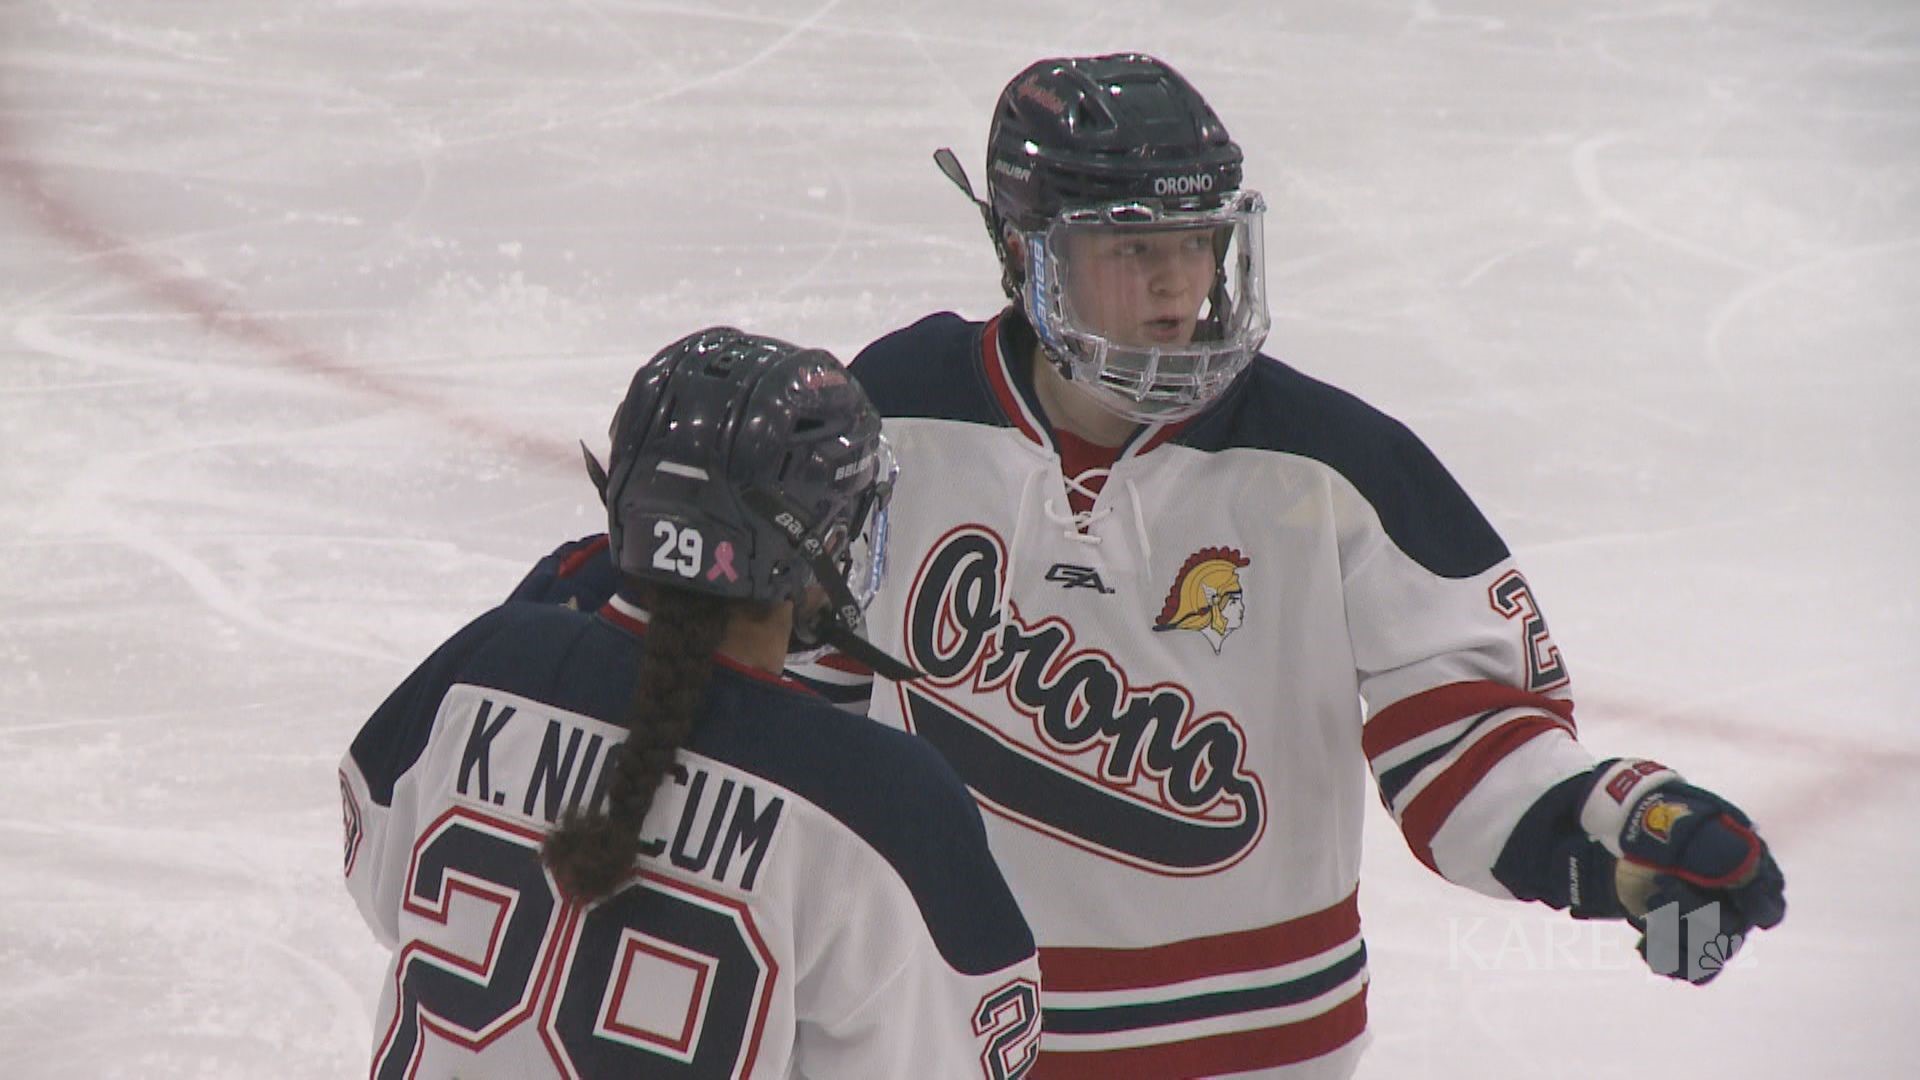 Kailey – a junior for the Spartans with 14 goals this year – is deaf and represented Team USA on the women's deaf hockey team.